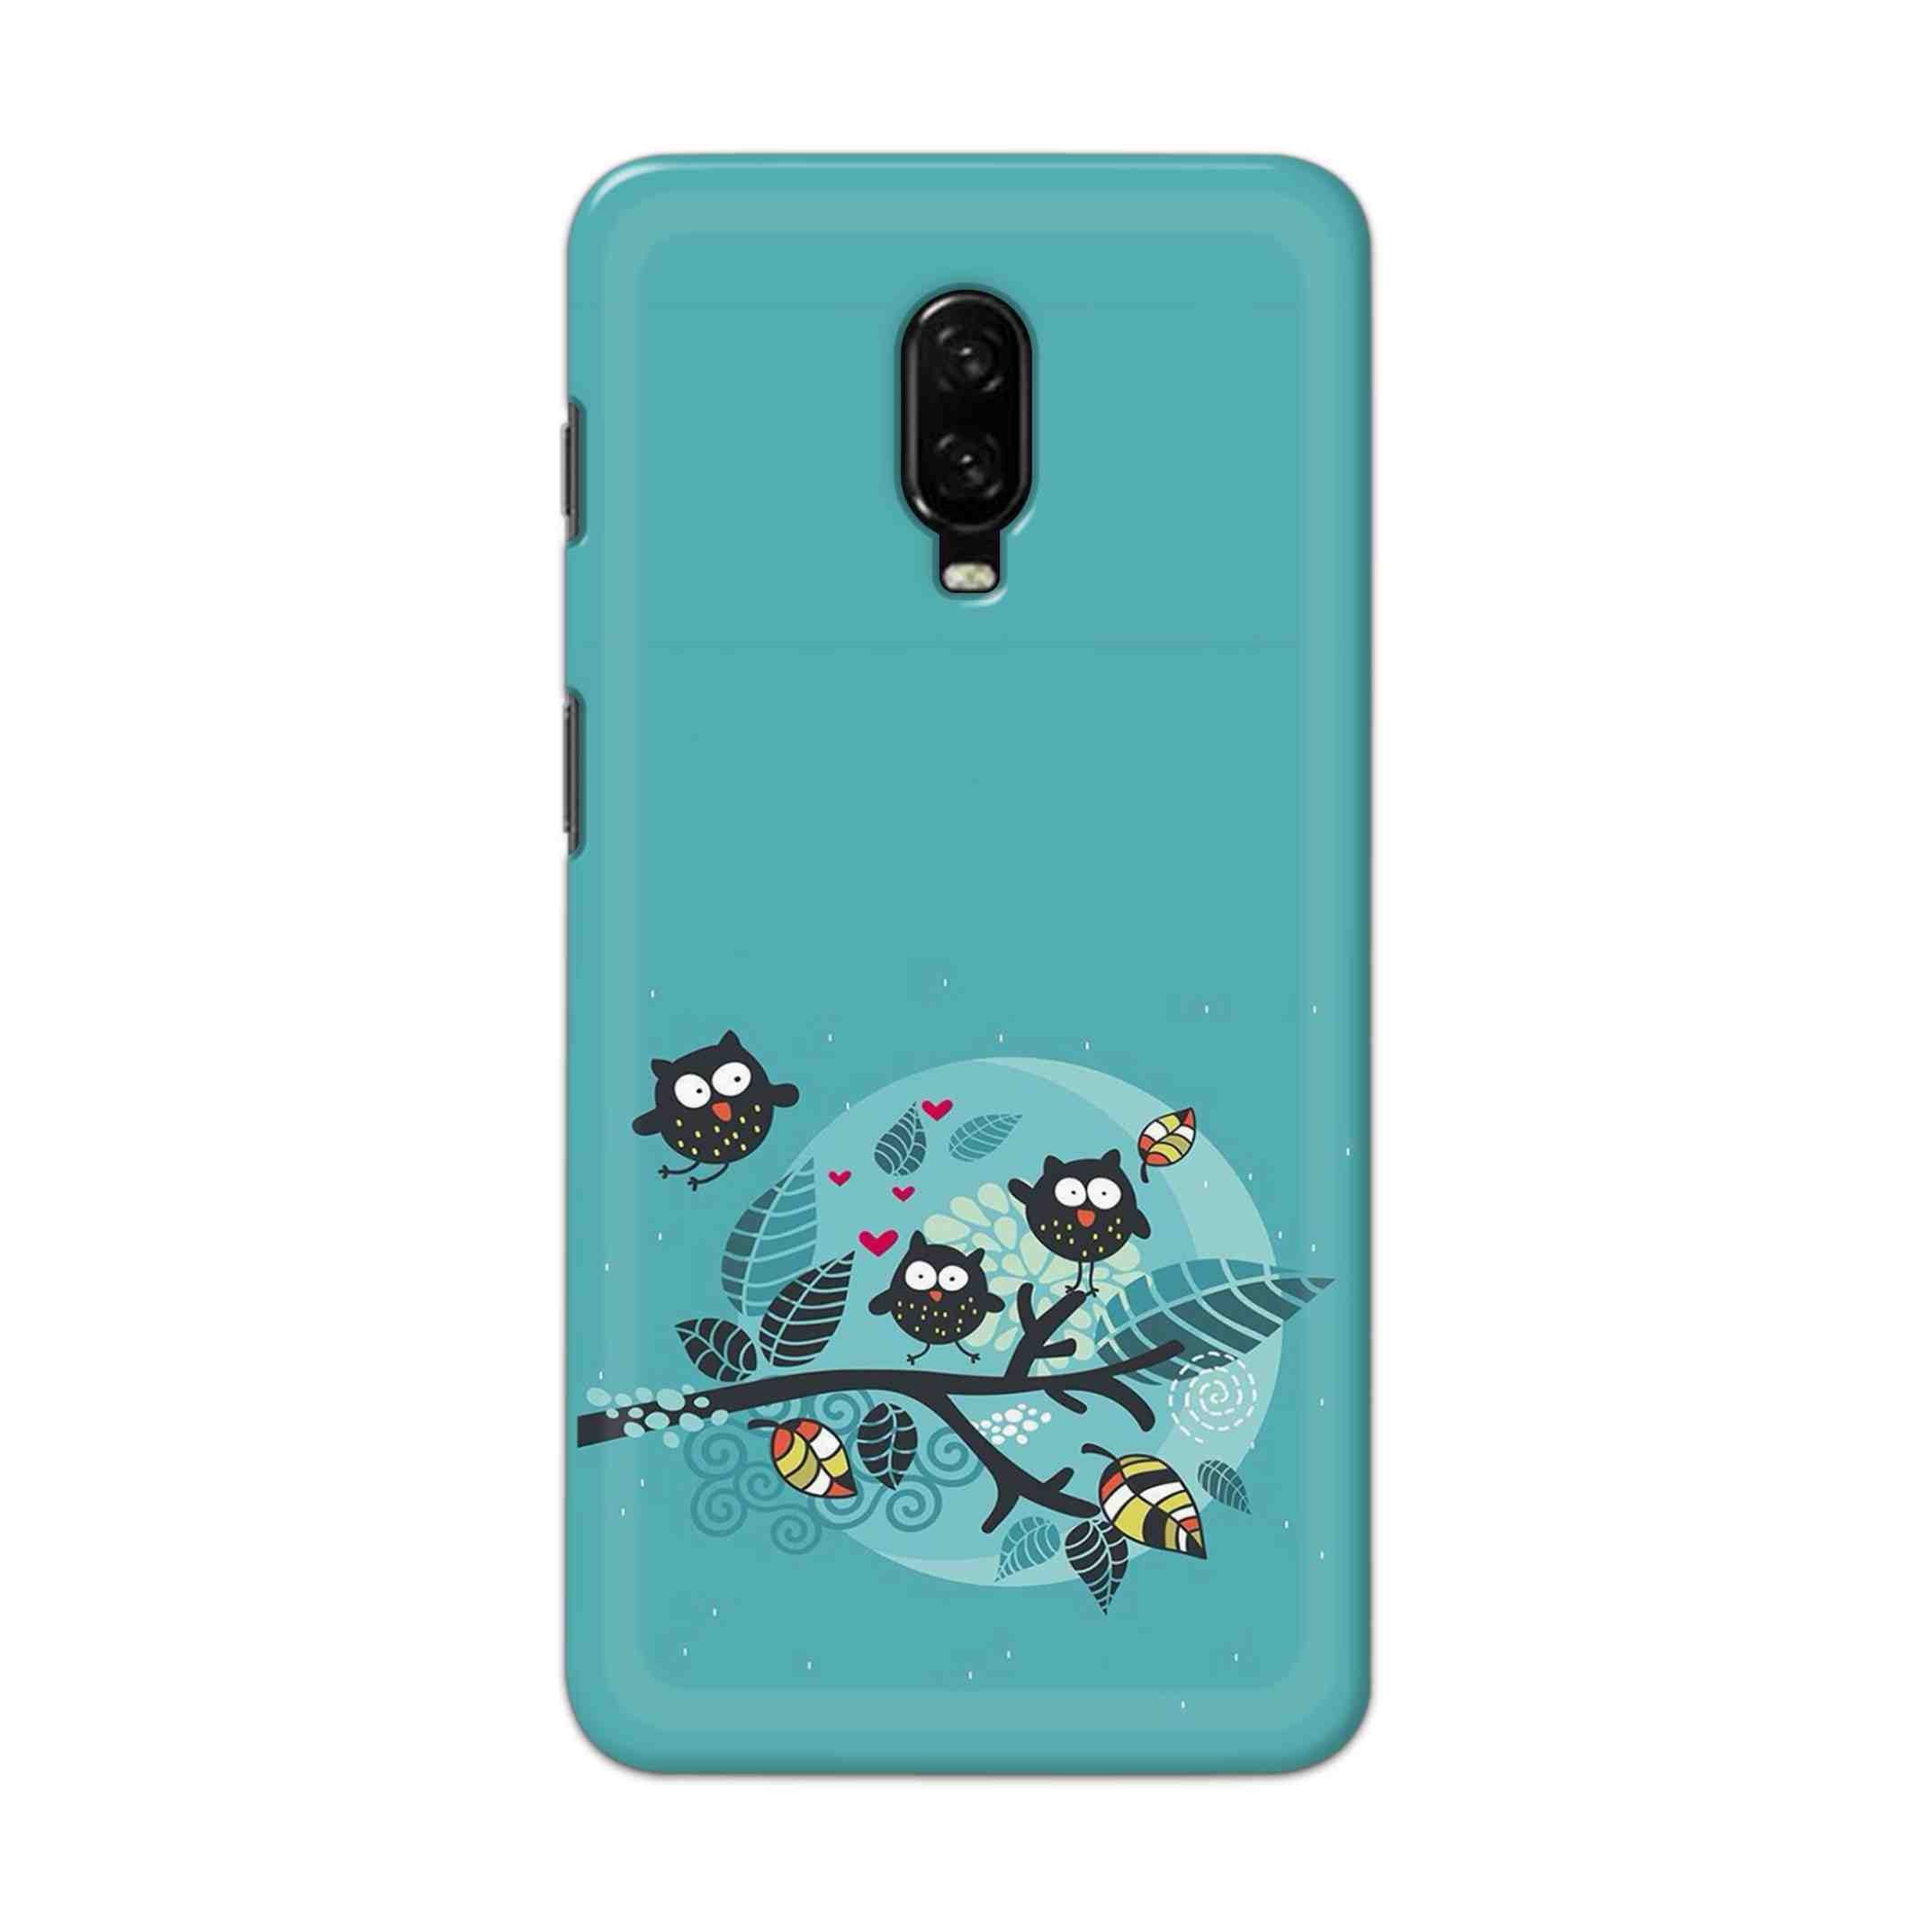 Buy Owl Hard Back Mobile Phone Case Cover For OnePlus 6T Online